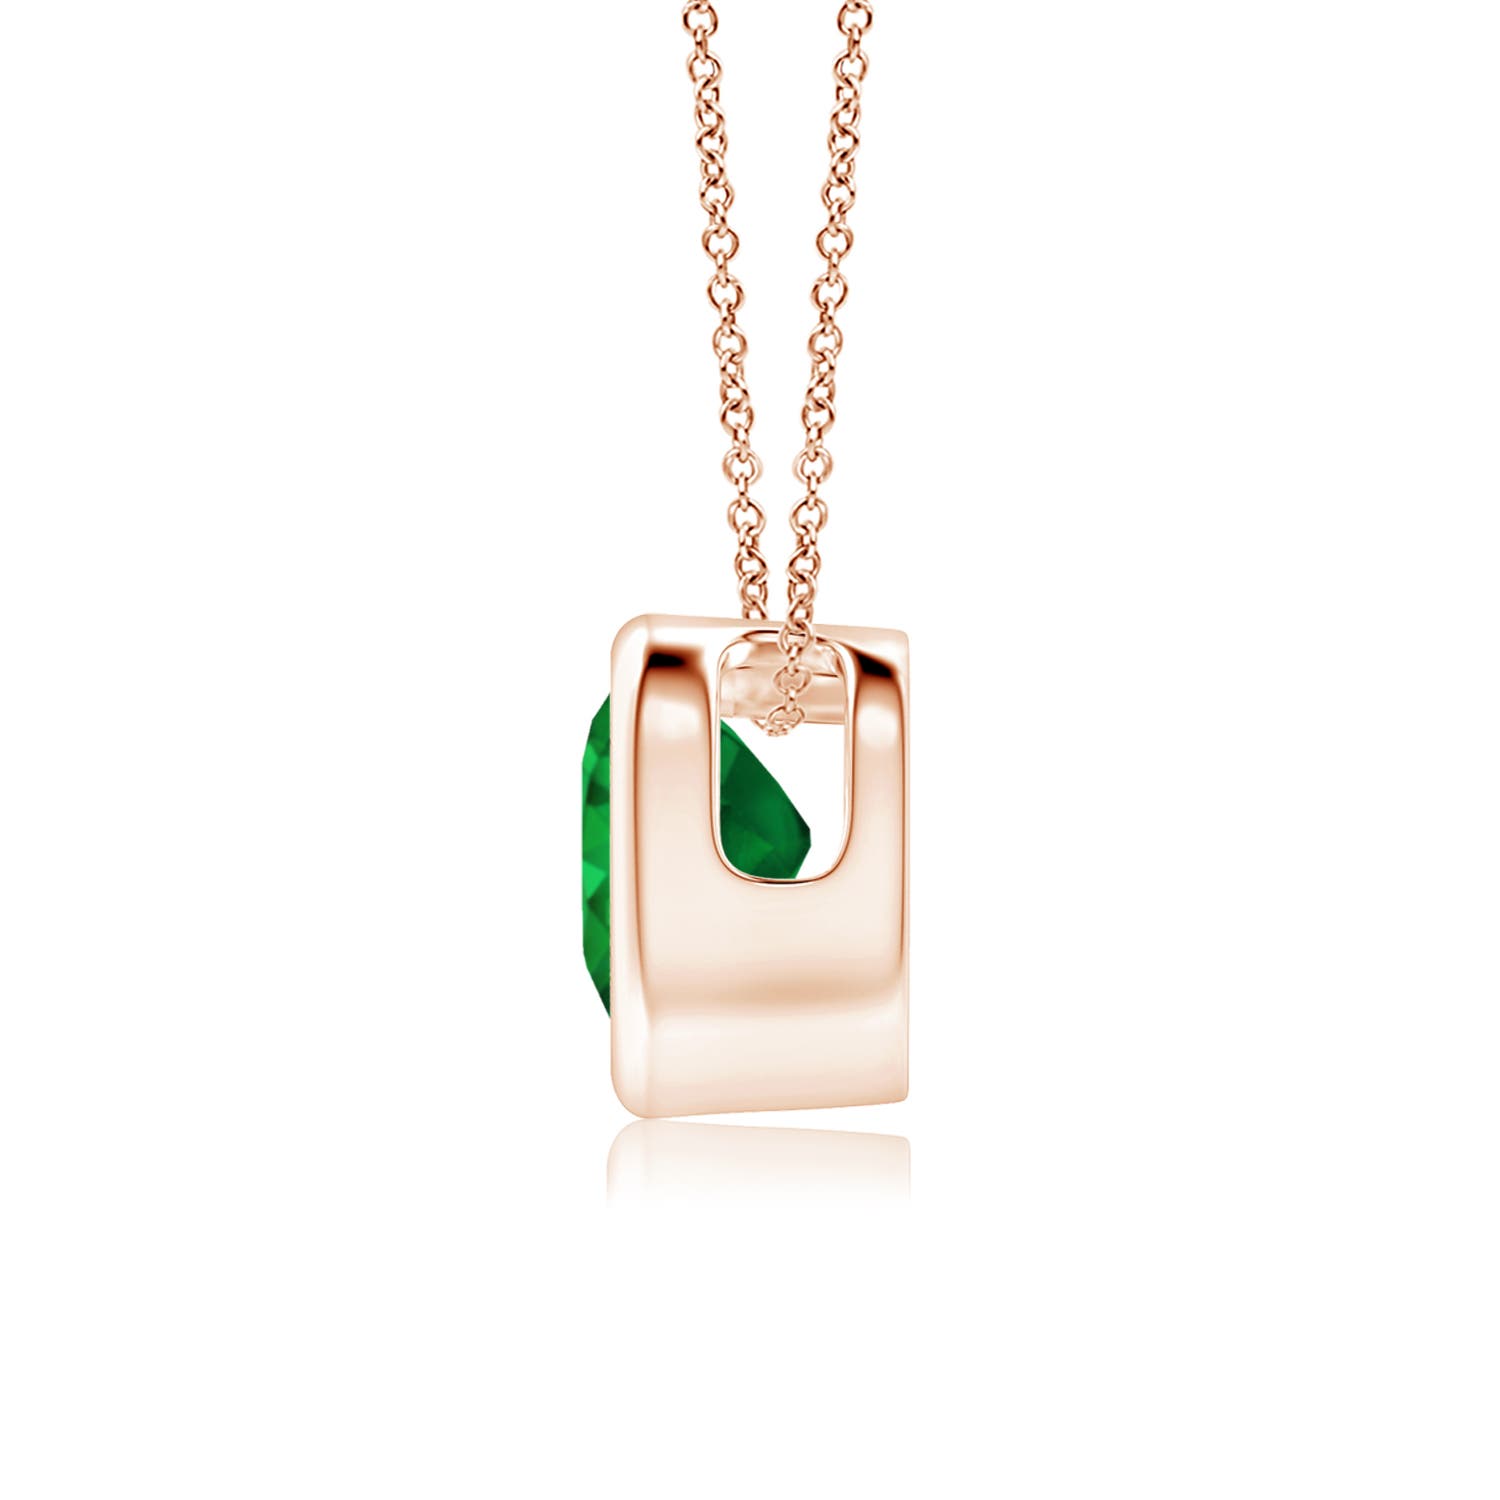 AAA - Emerald / 0.4 CT / 14 KT Rose Gold